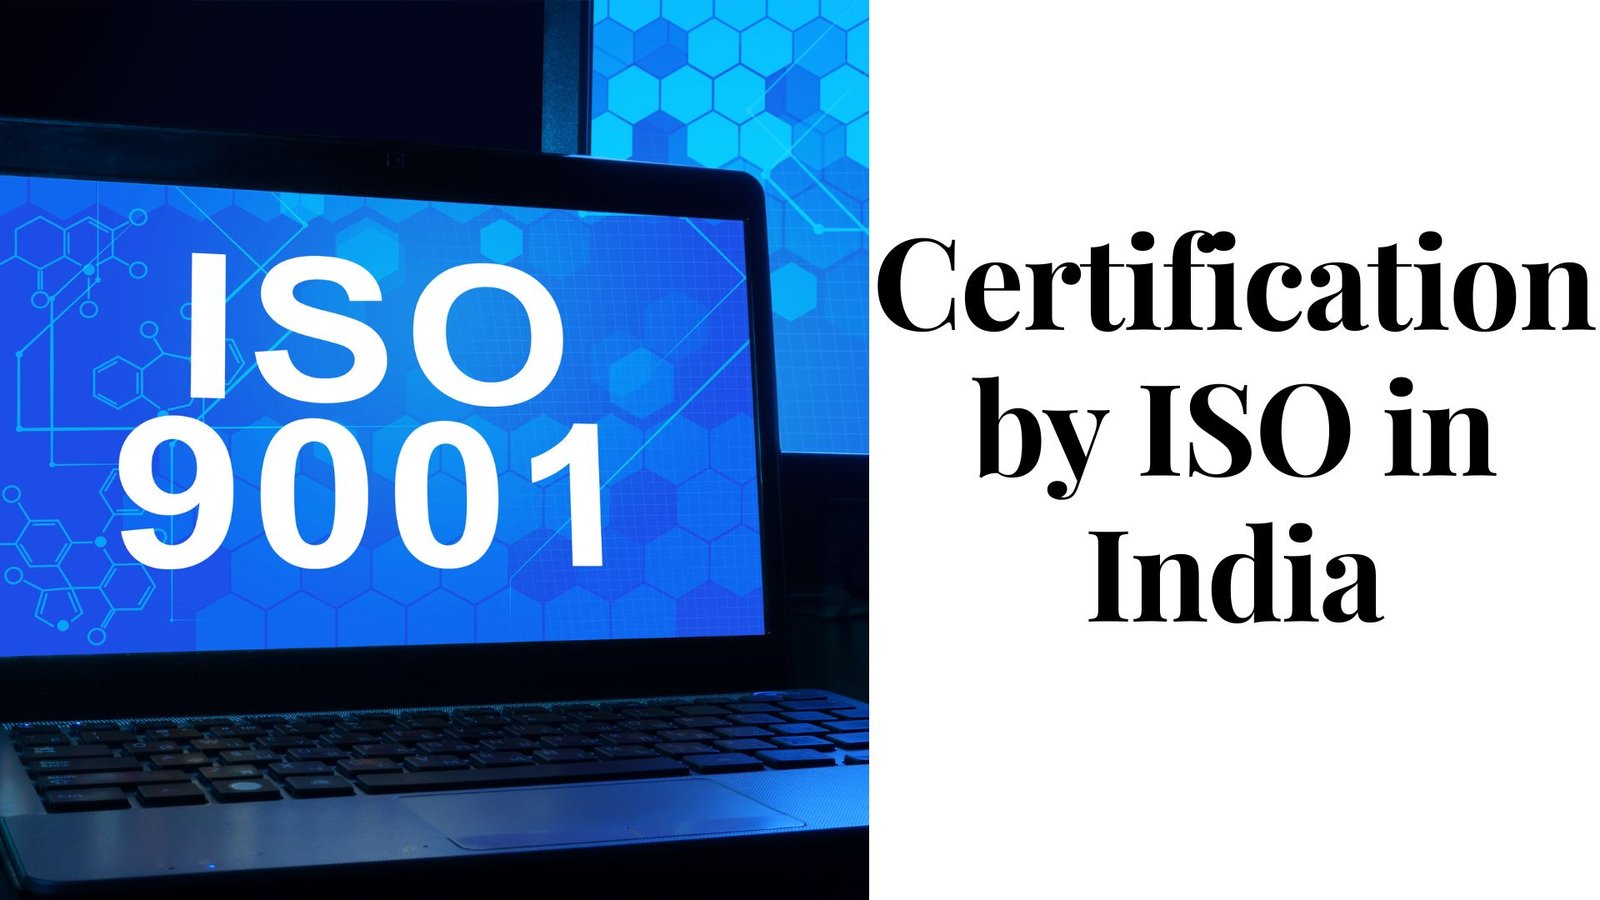 Certification by ISO in India